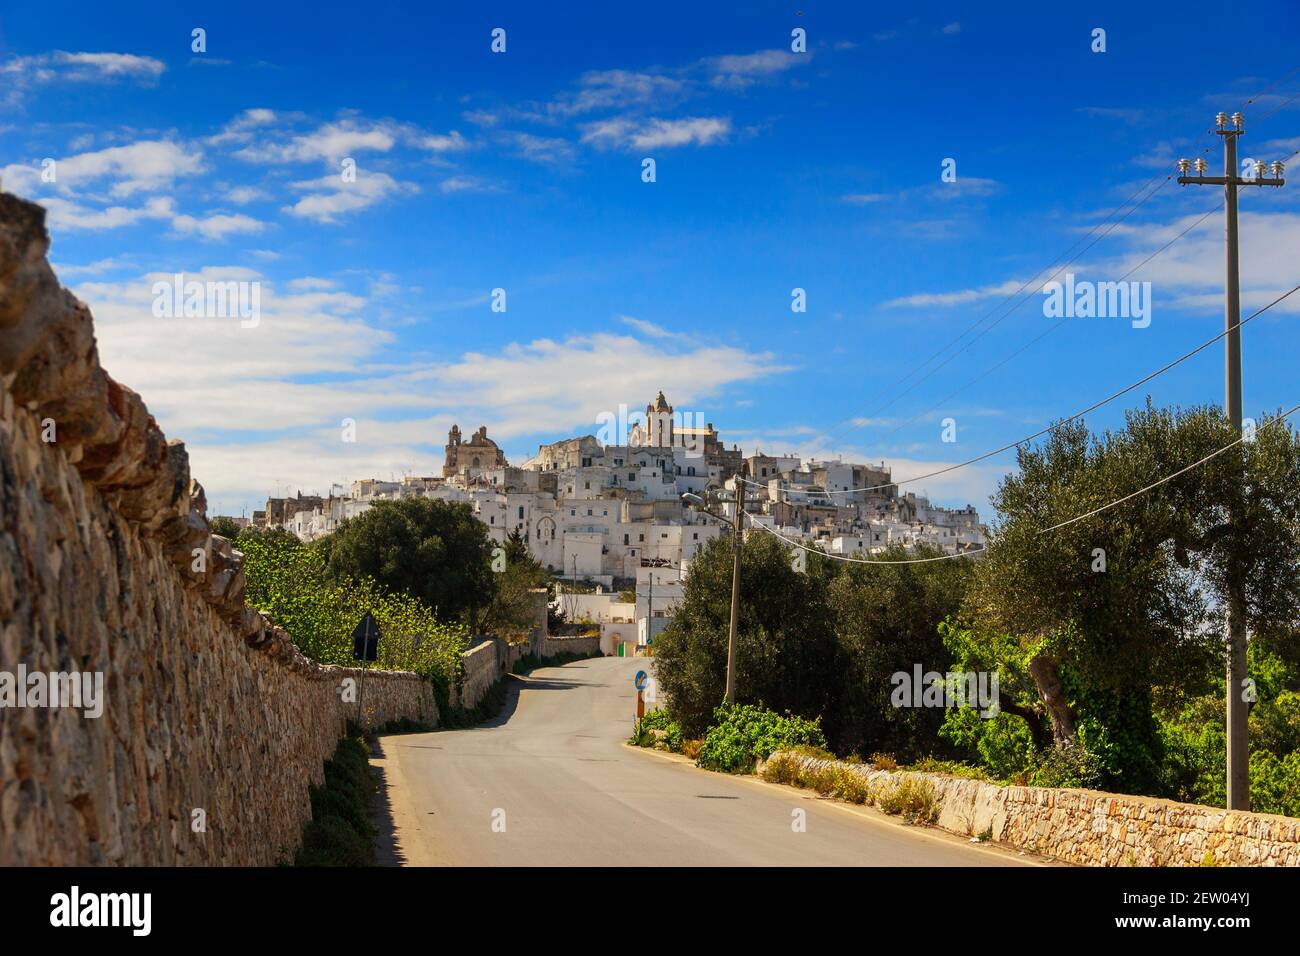 Ostuni old town, Puglia, Italy.It's commonly referred to as 'the White Town' for its white walls and its typically white painted architecture. Stock Photo